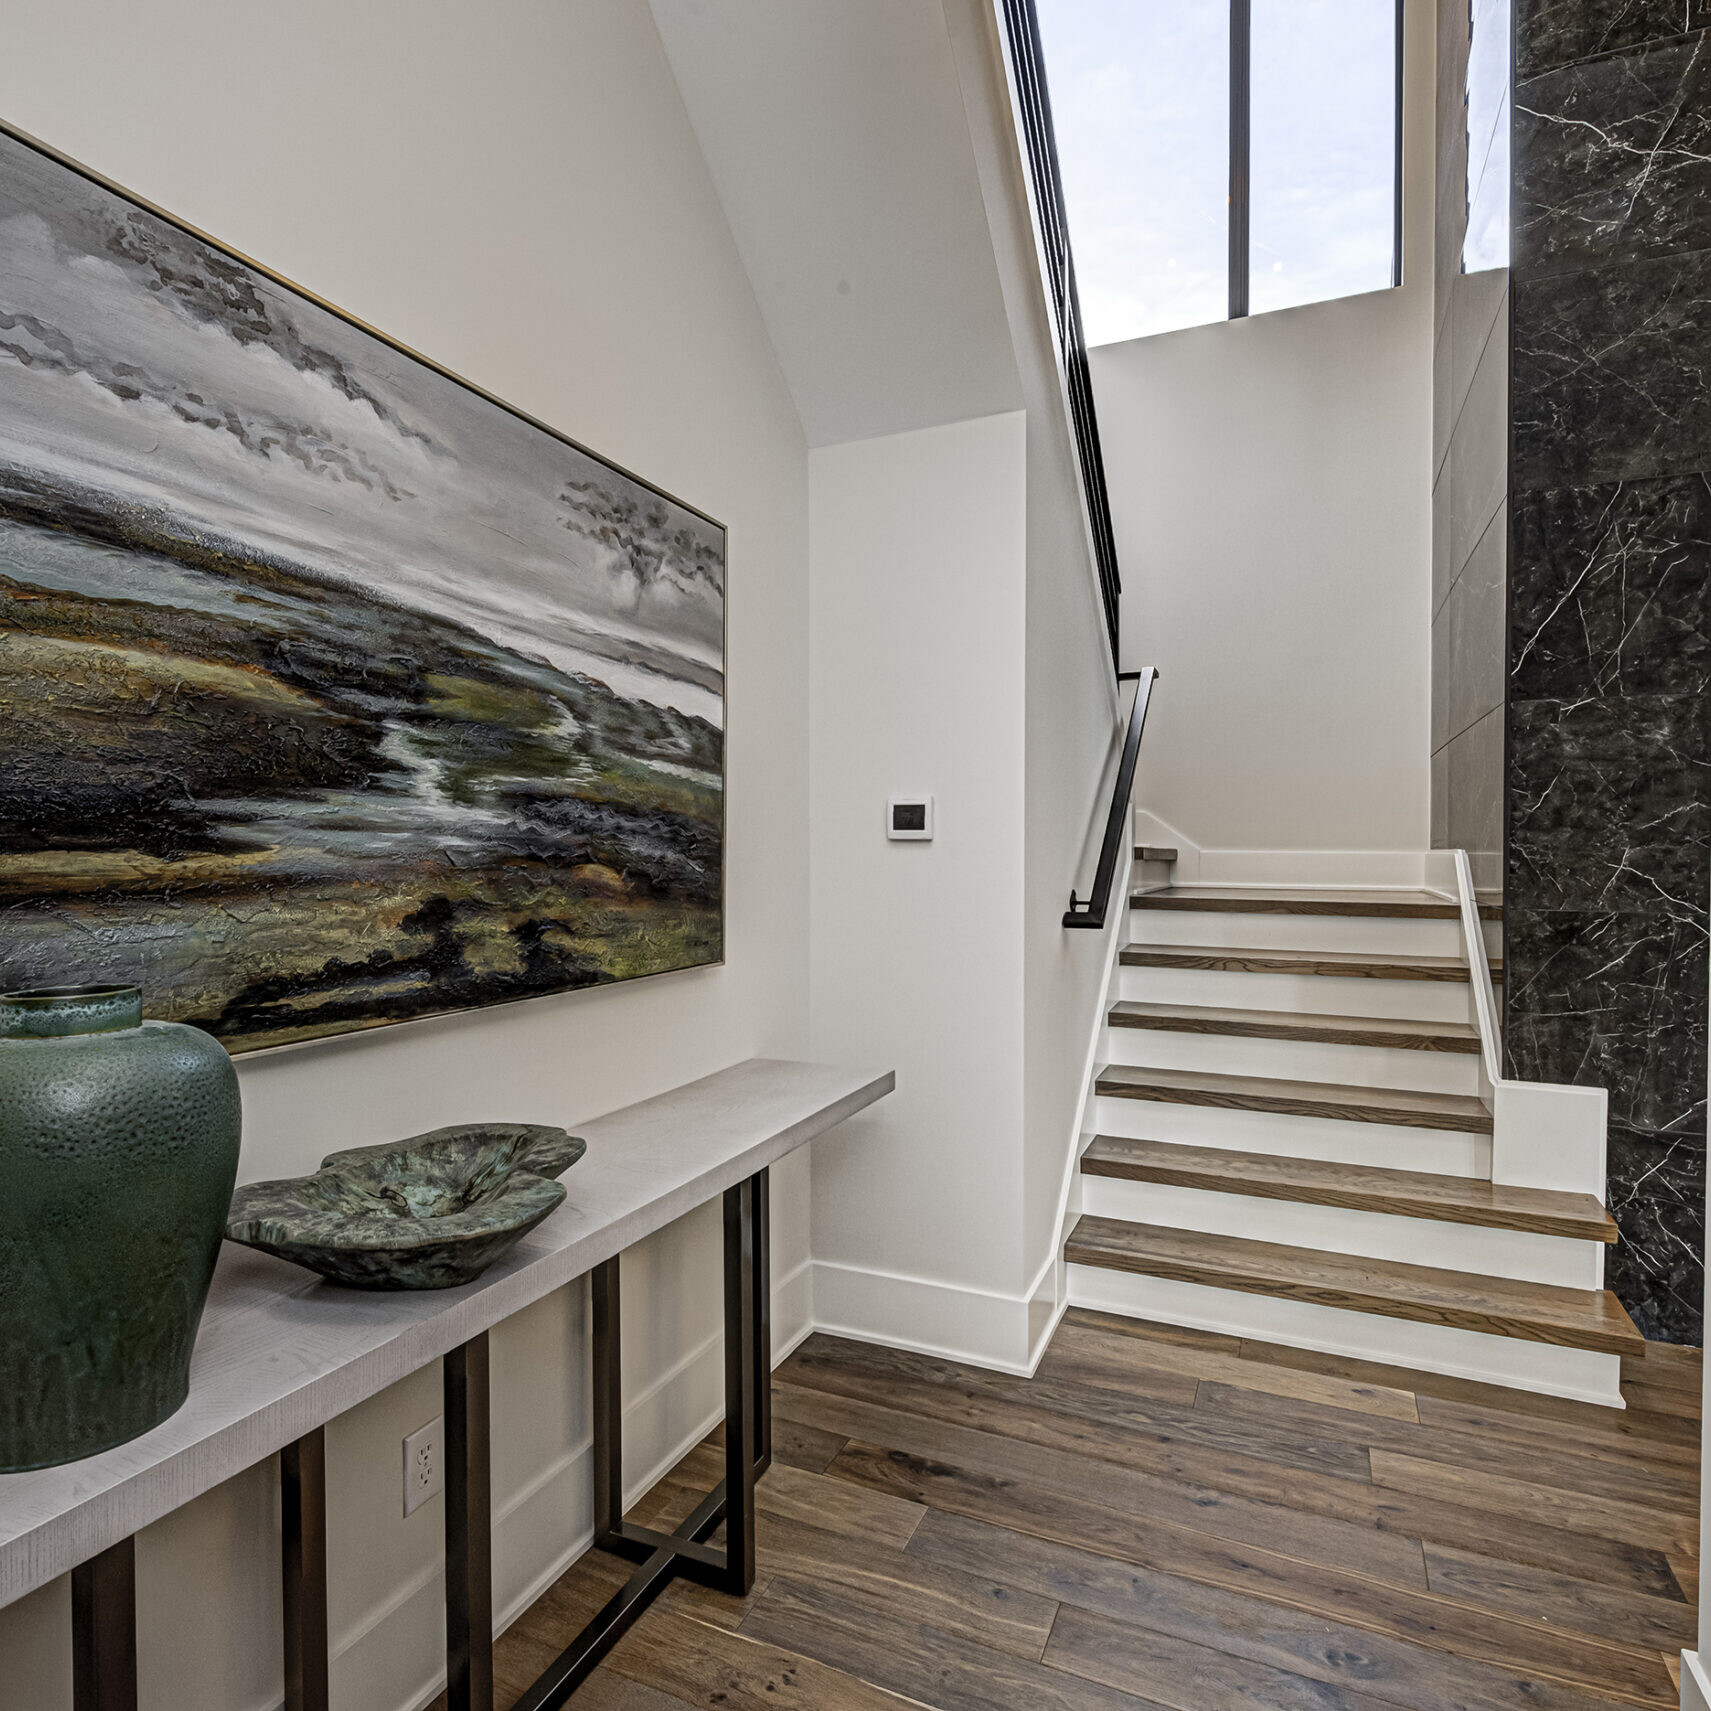 A hallway with hardwood floors and a painting on the wall.